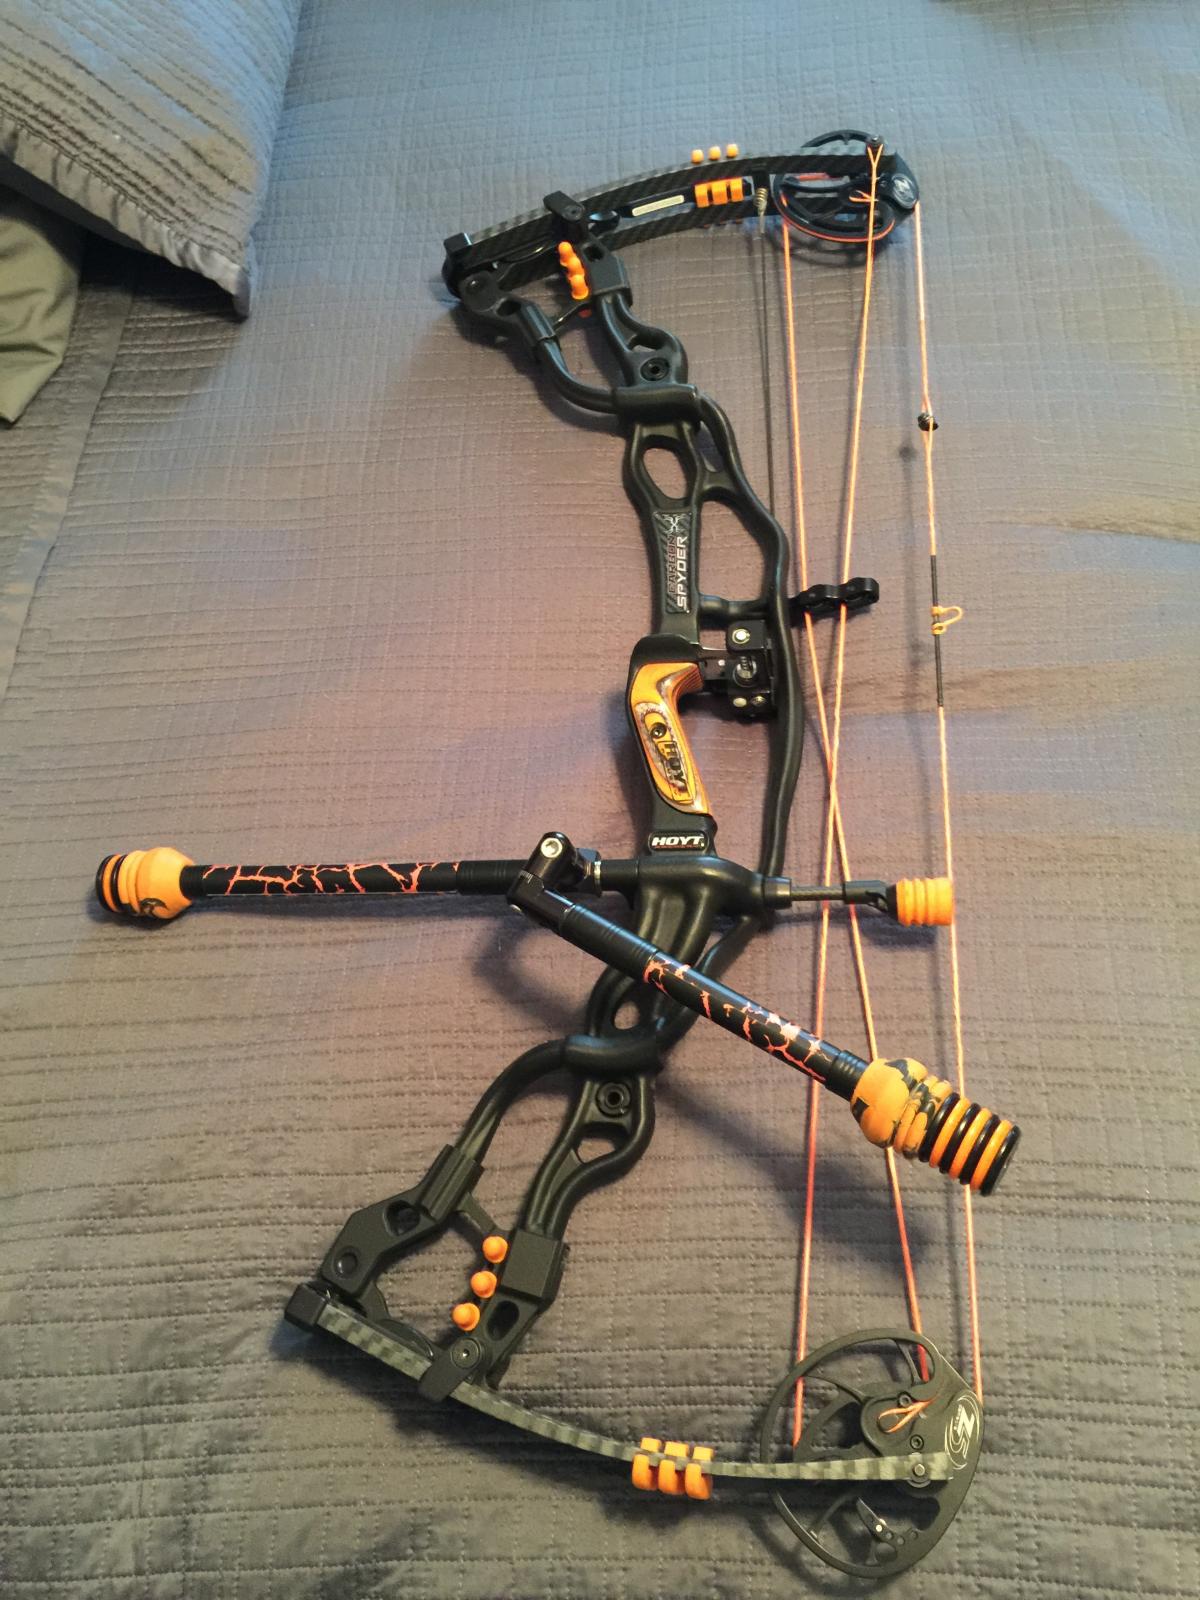 2014 hoyt carbon spyder turbo Classified - CouesWhitetail.com Discussion forum